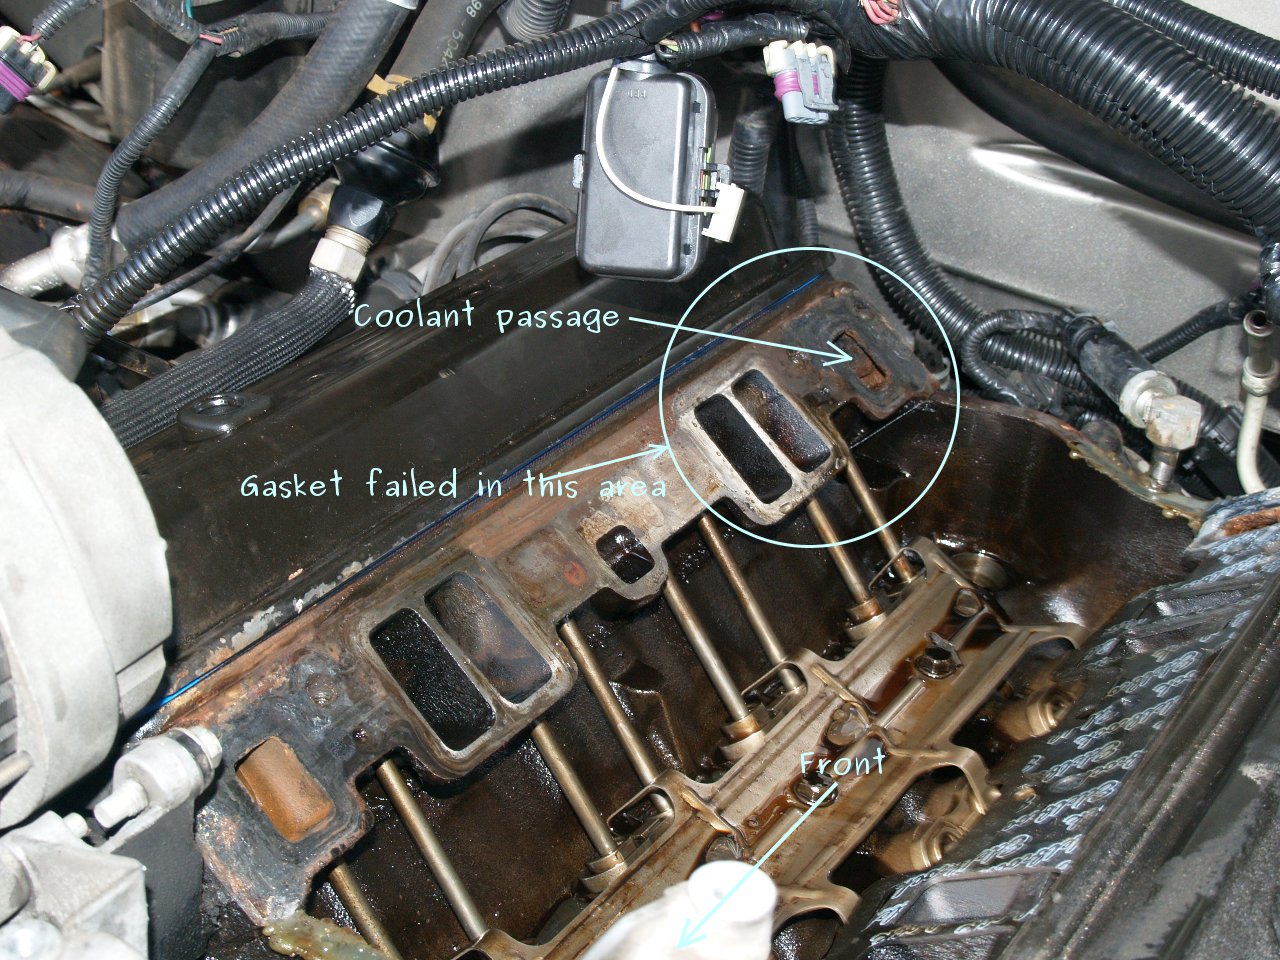 See P3003 in engine